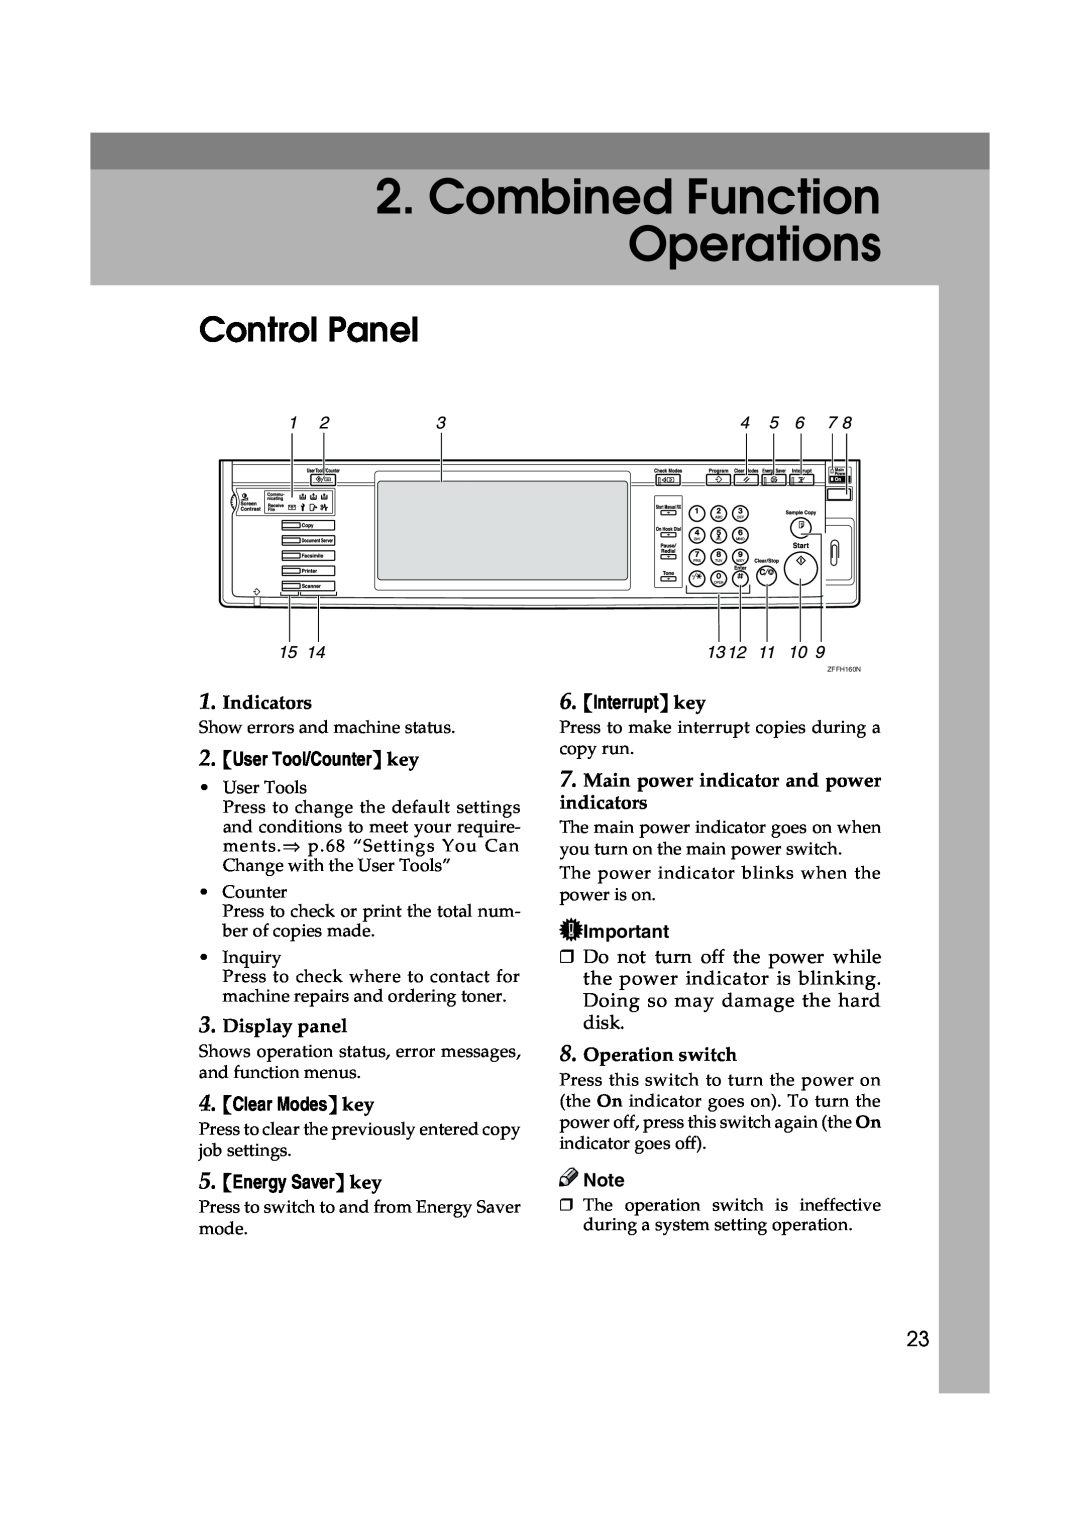 Lanier 5622 AG, 5627 AG manual Combined Function Operations, Control Panel, Indicators, User Tool/Counter key, Display panel 